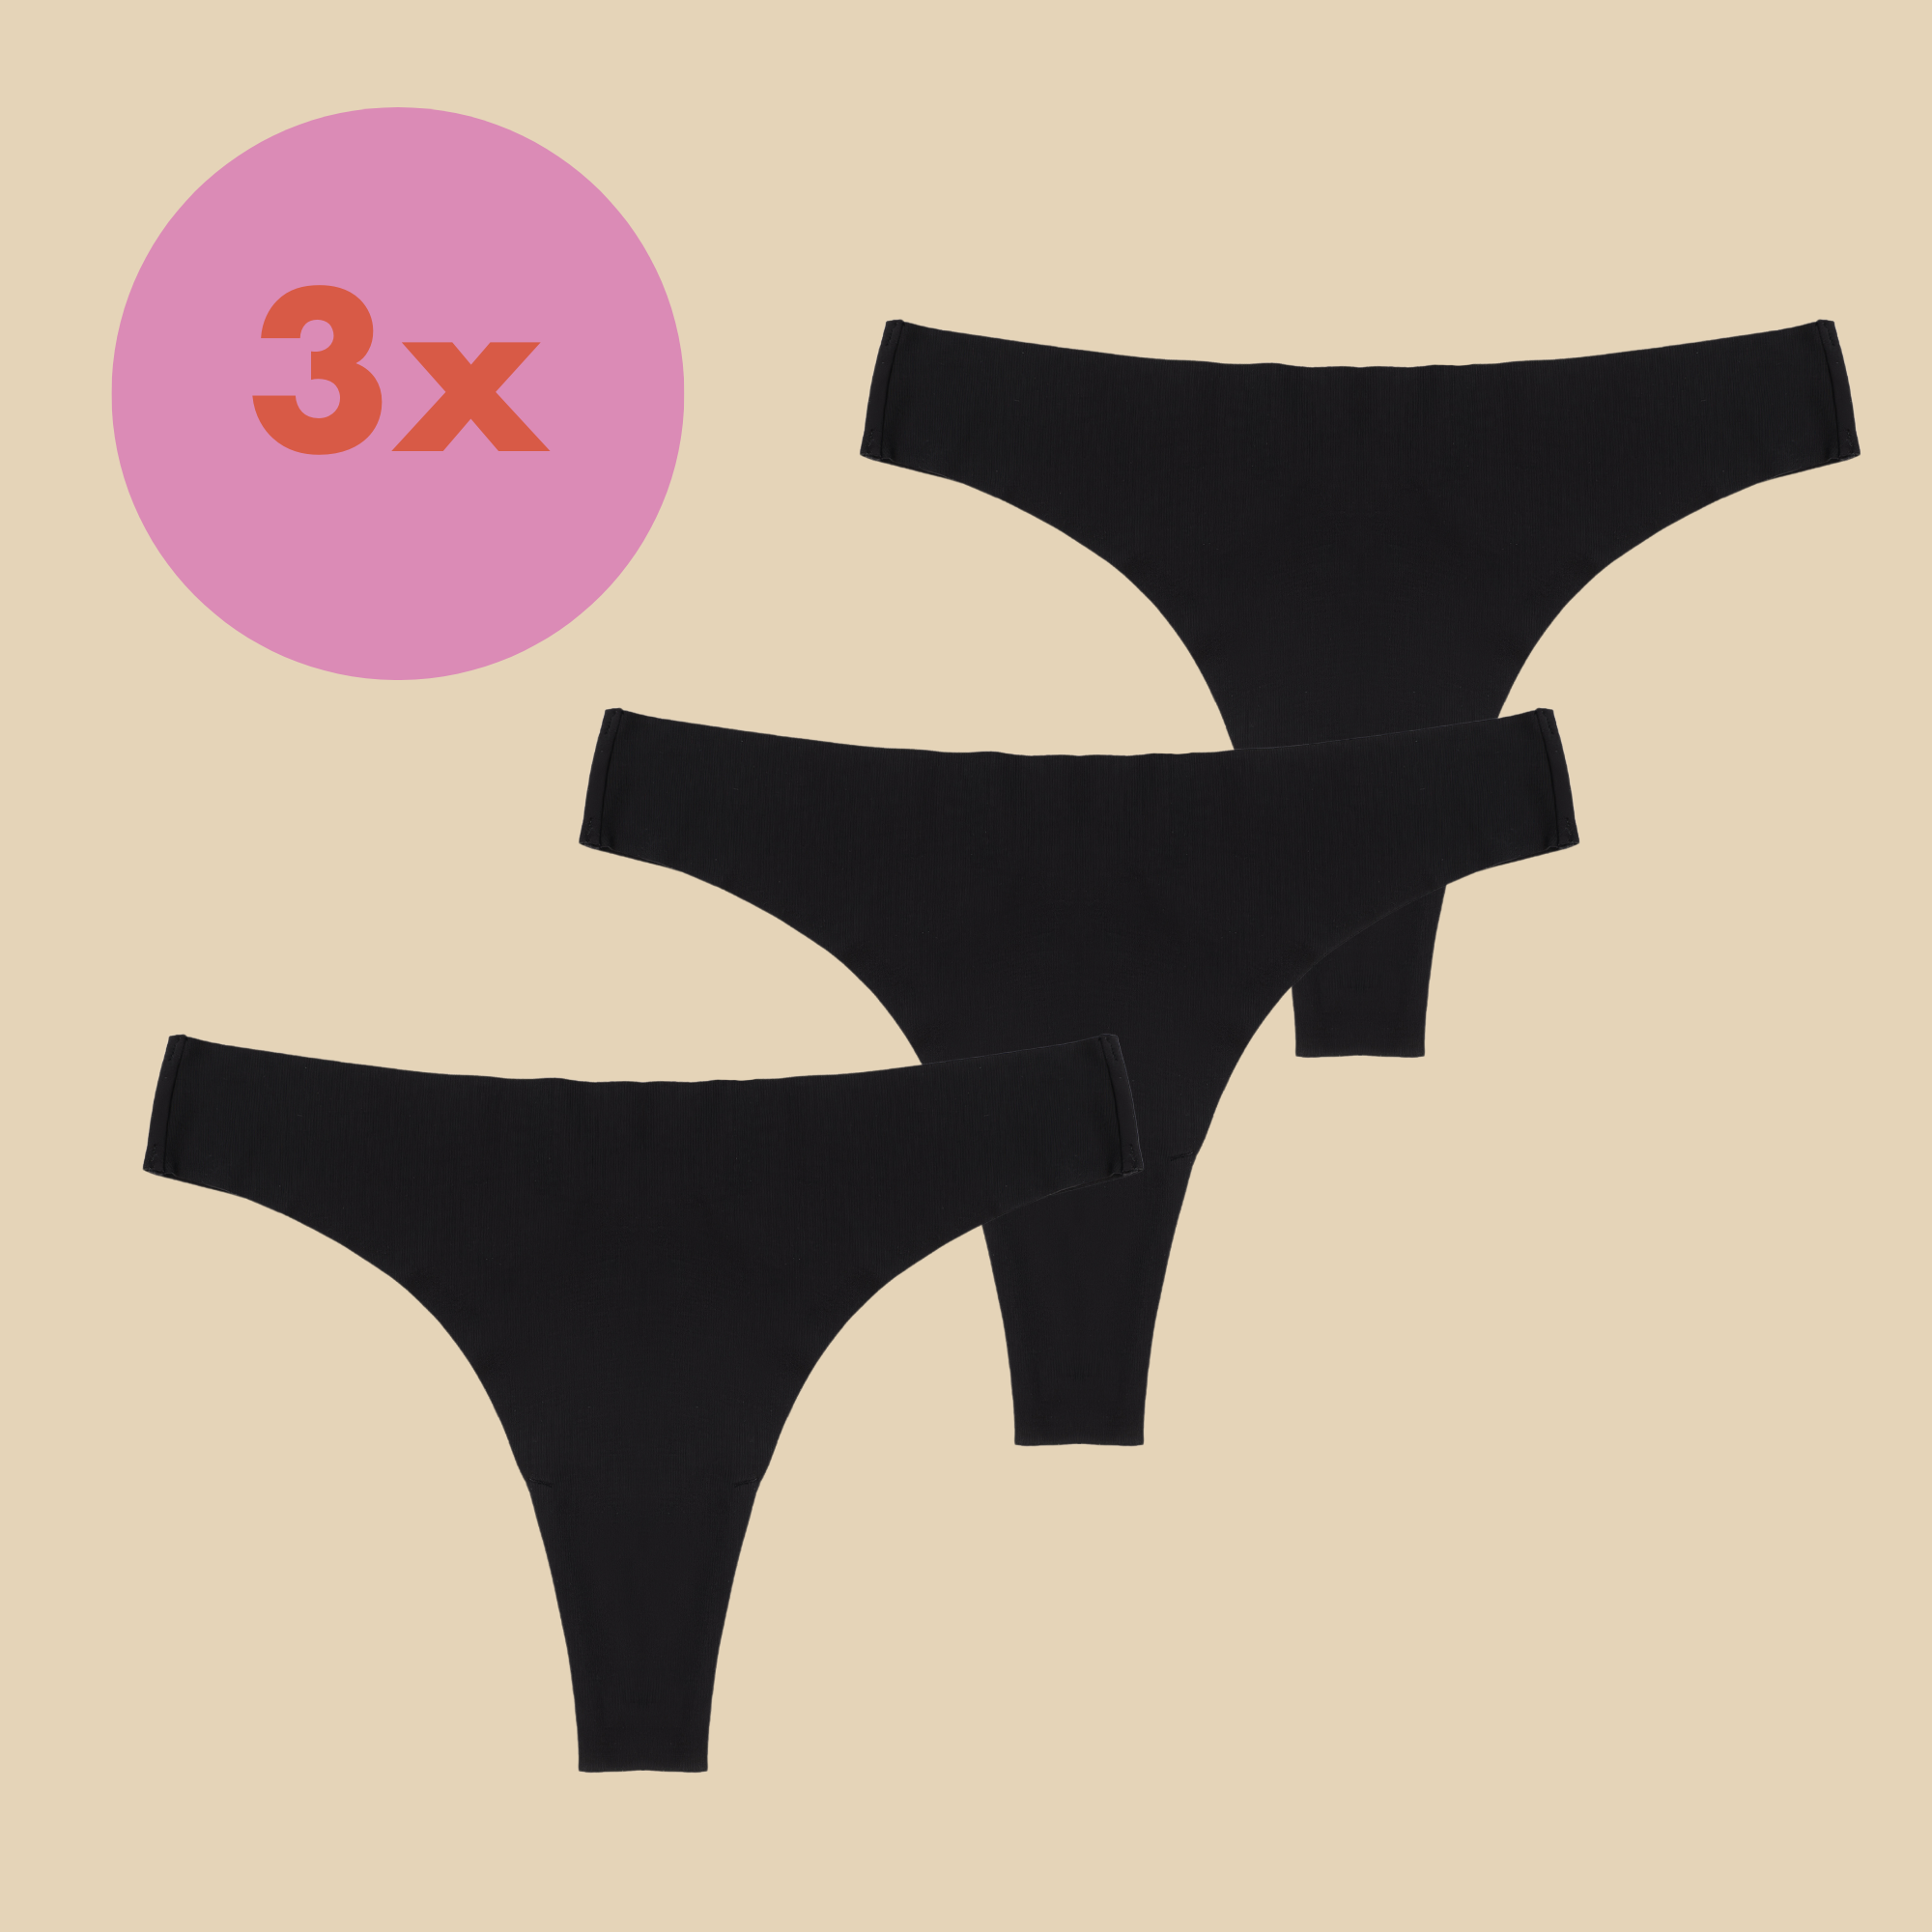 dais daily underwear which is a sustainable alternative to panty liners and tampons. Used for light periods and discharge. In thong cut and black colour. Available in 3 pack for 10% discount. 